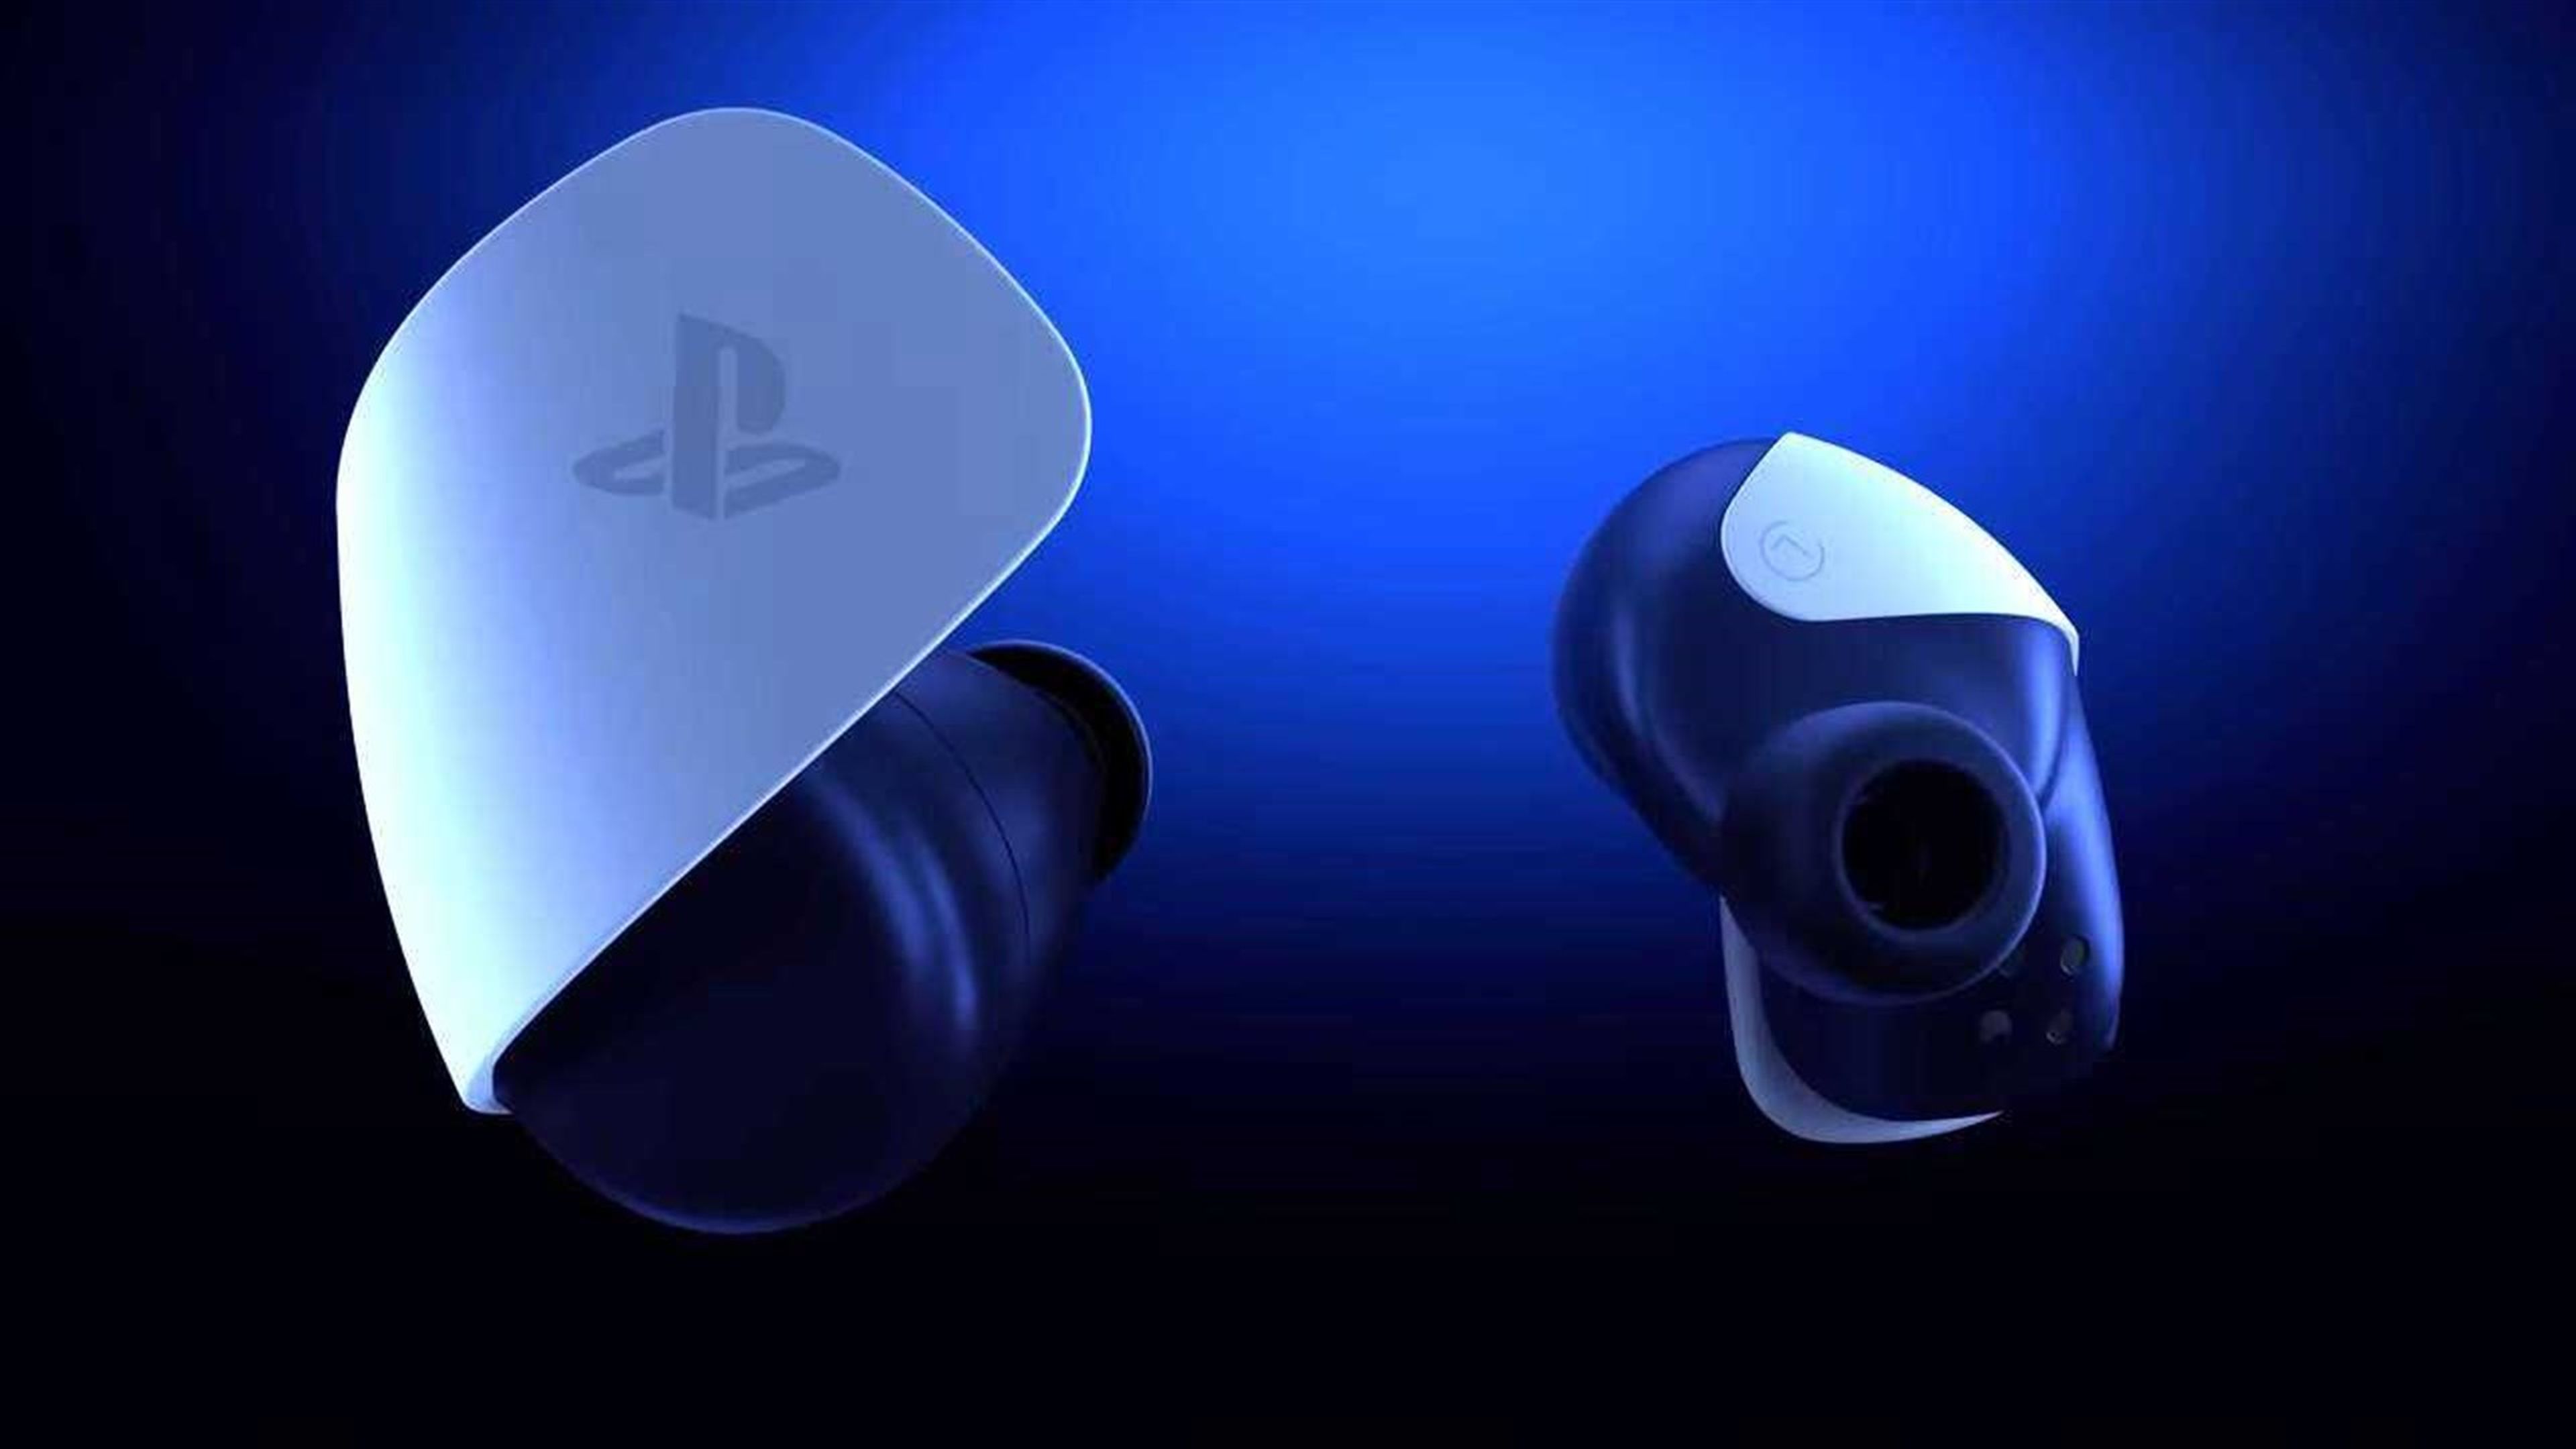 PlayStation Earbuds